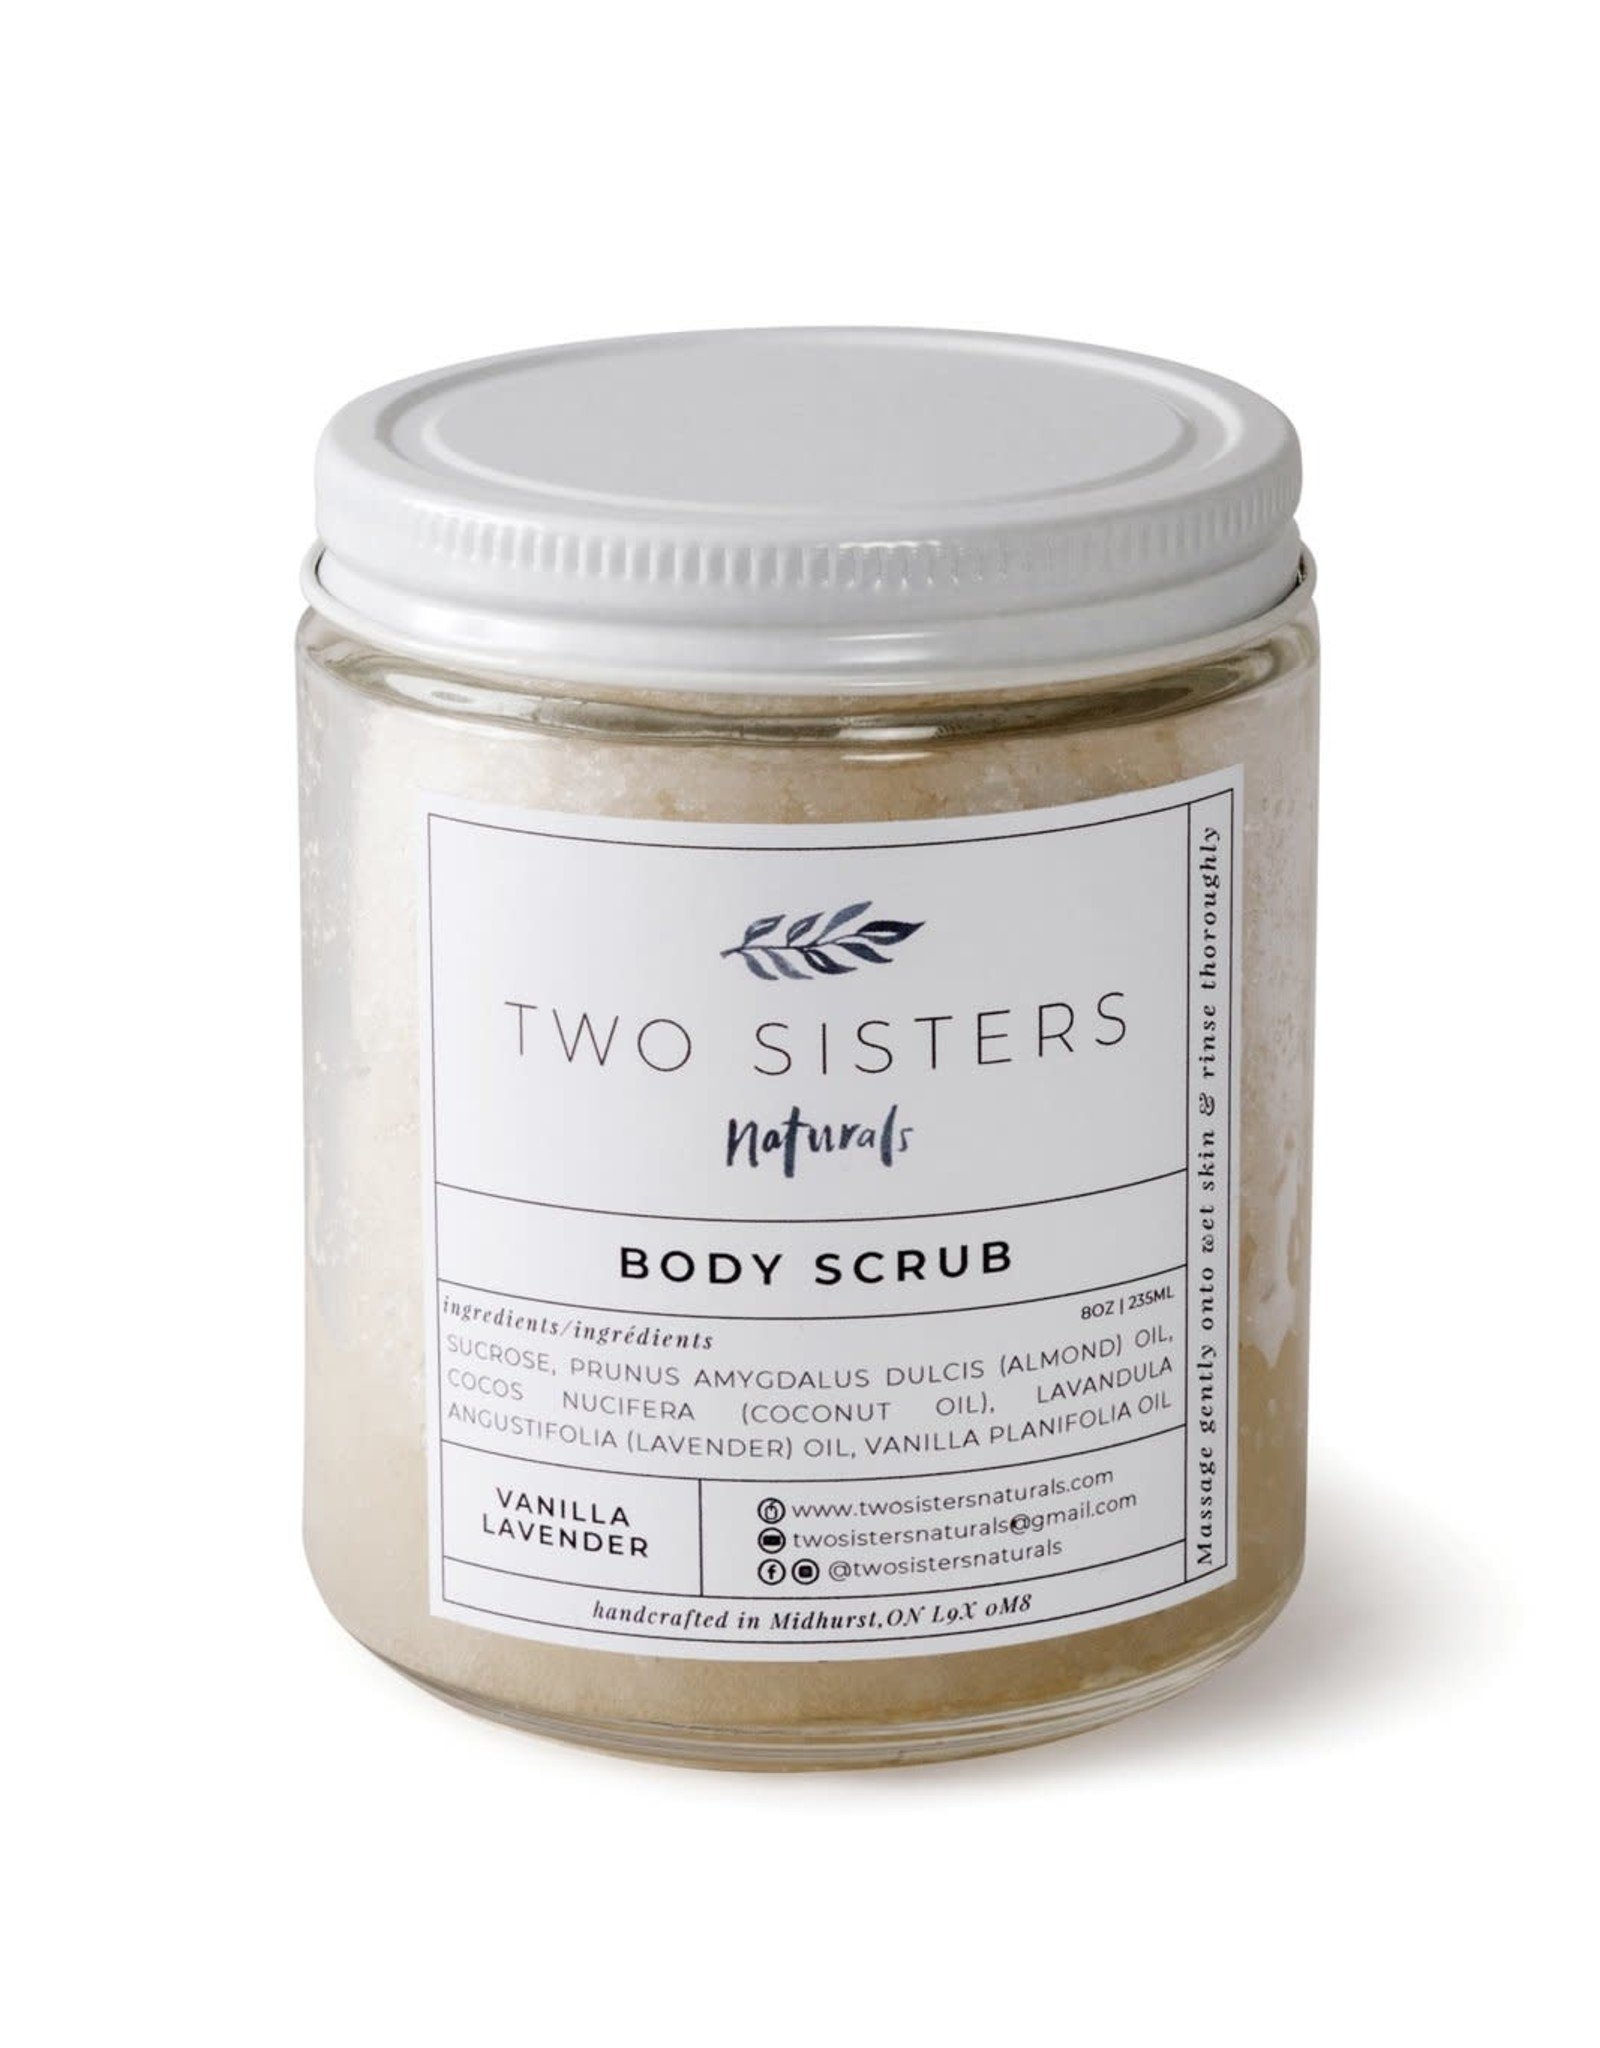 Two Sisters Naturals Body Scrub by Two Sisters Naturals